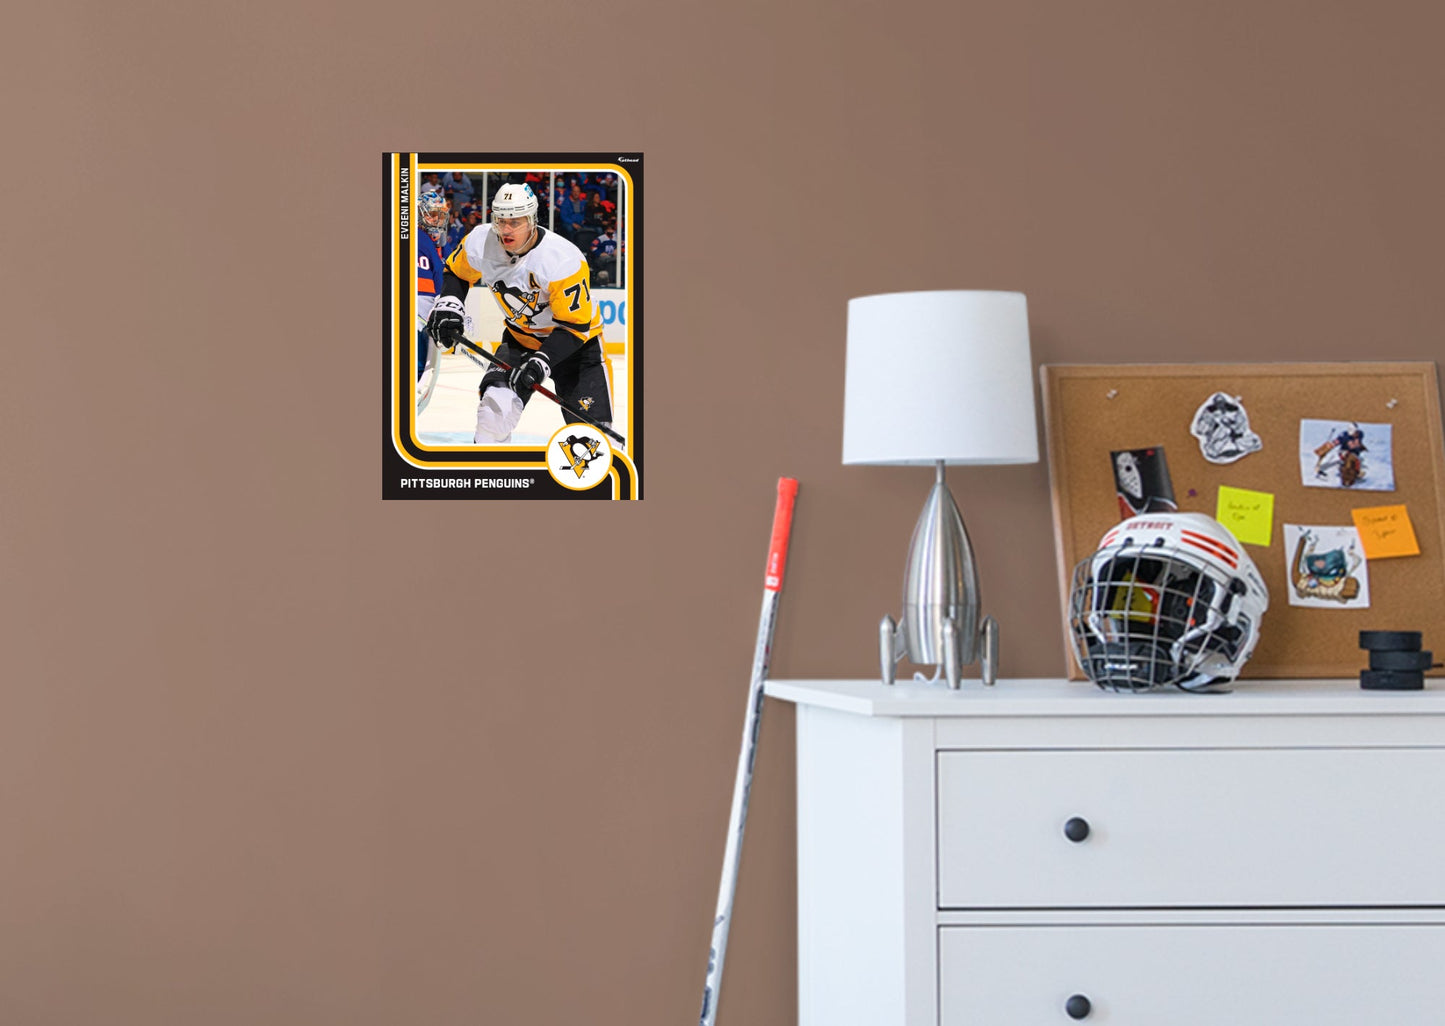 Pittsburgh Penguins: Evgeni Malkin Poster - Officially Licensed NHL Removable Adhesive Decal